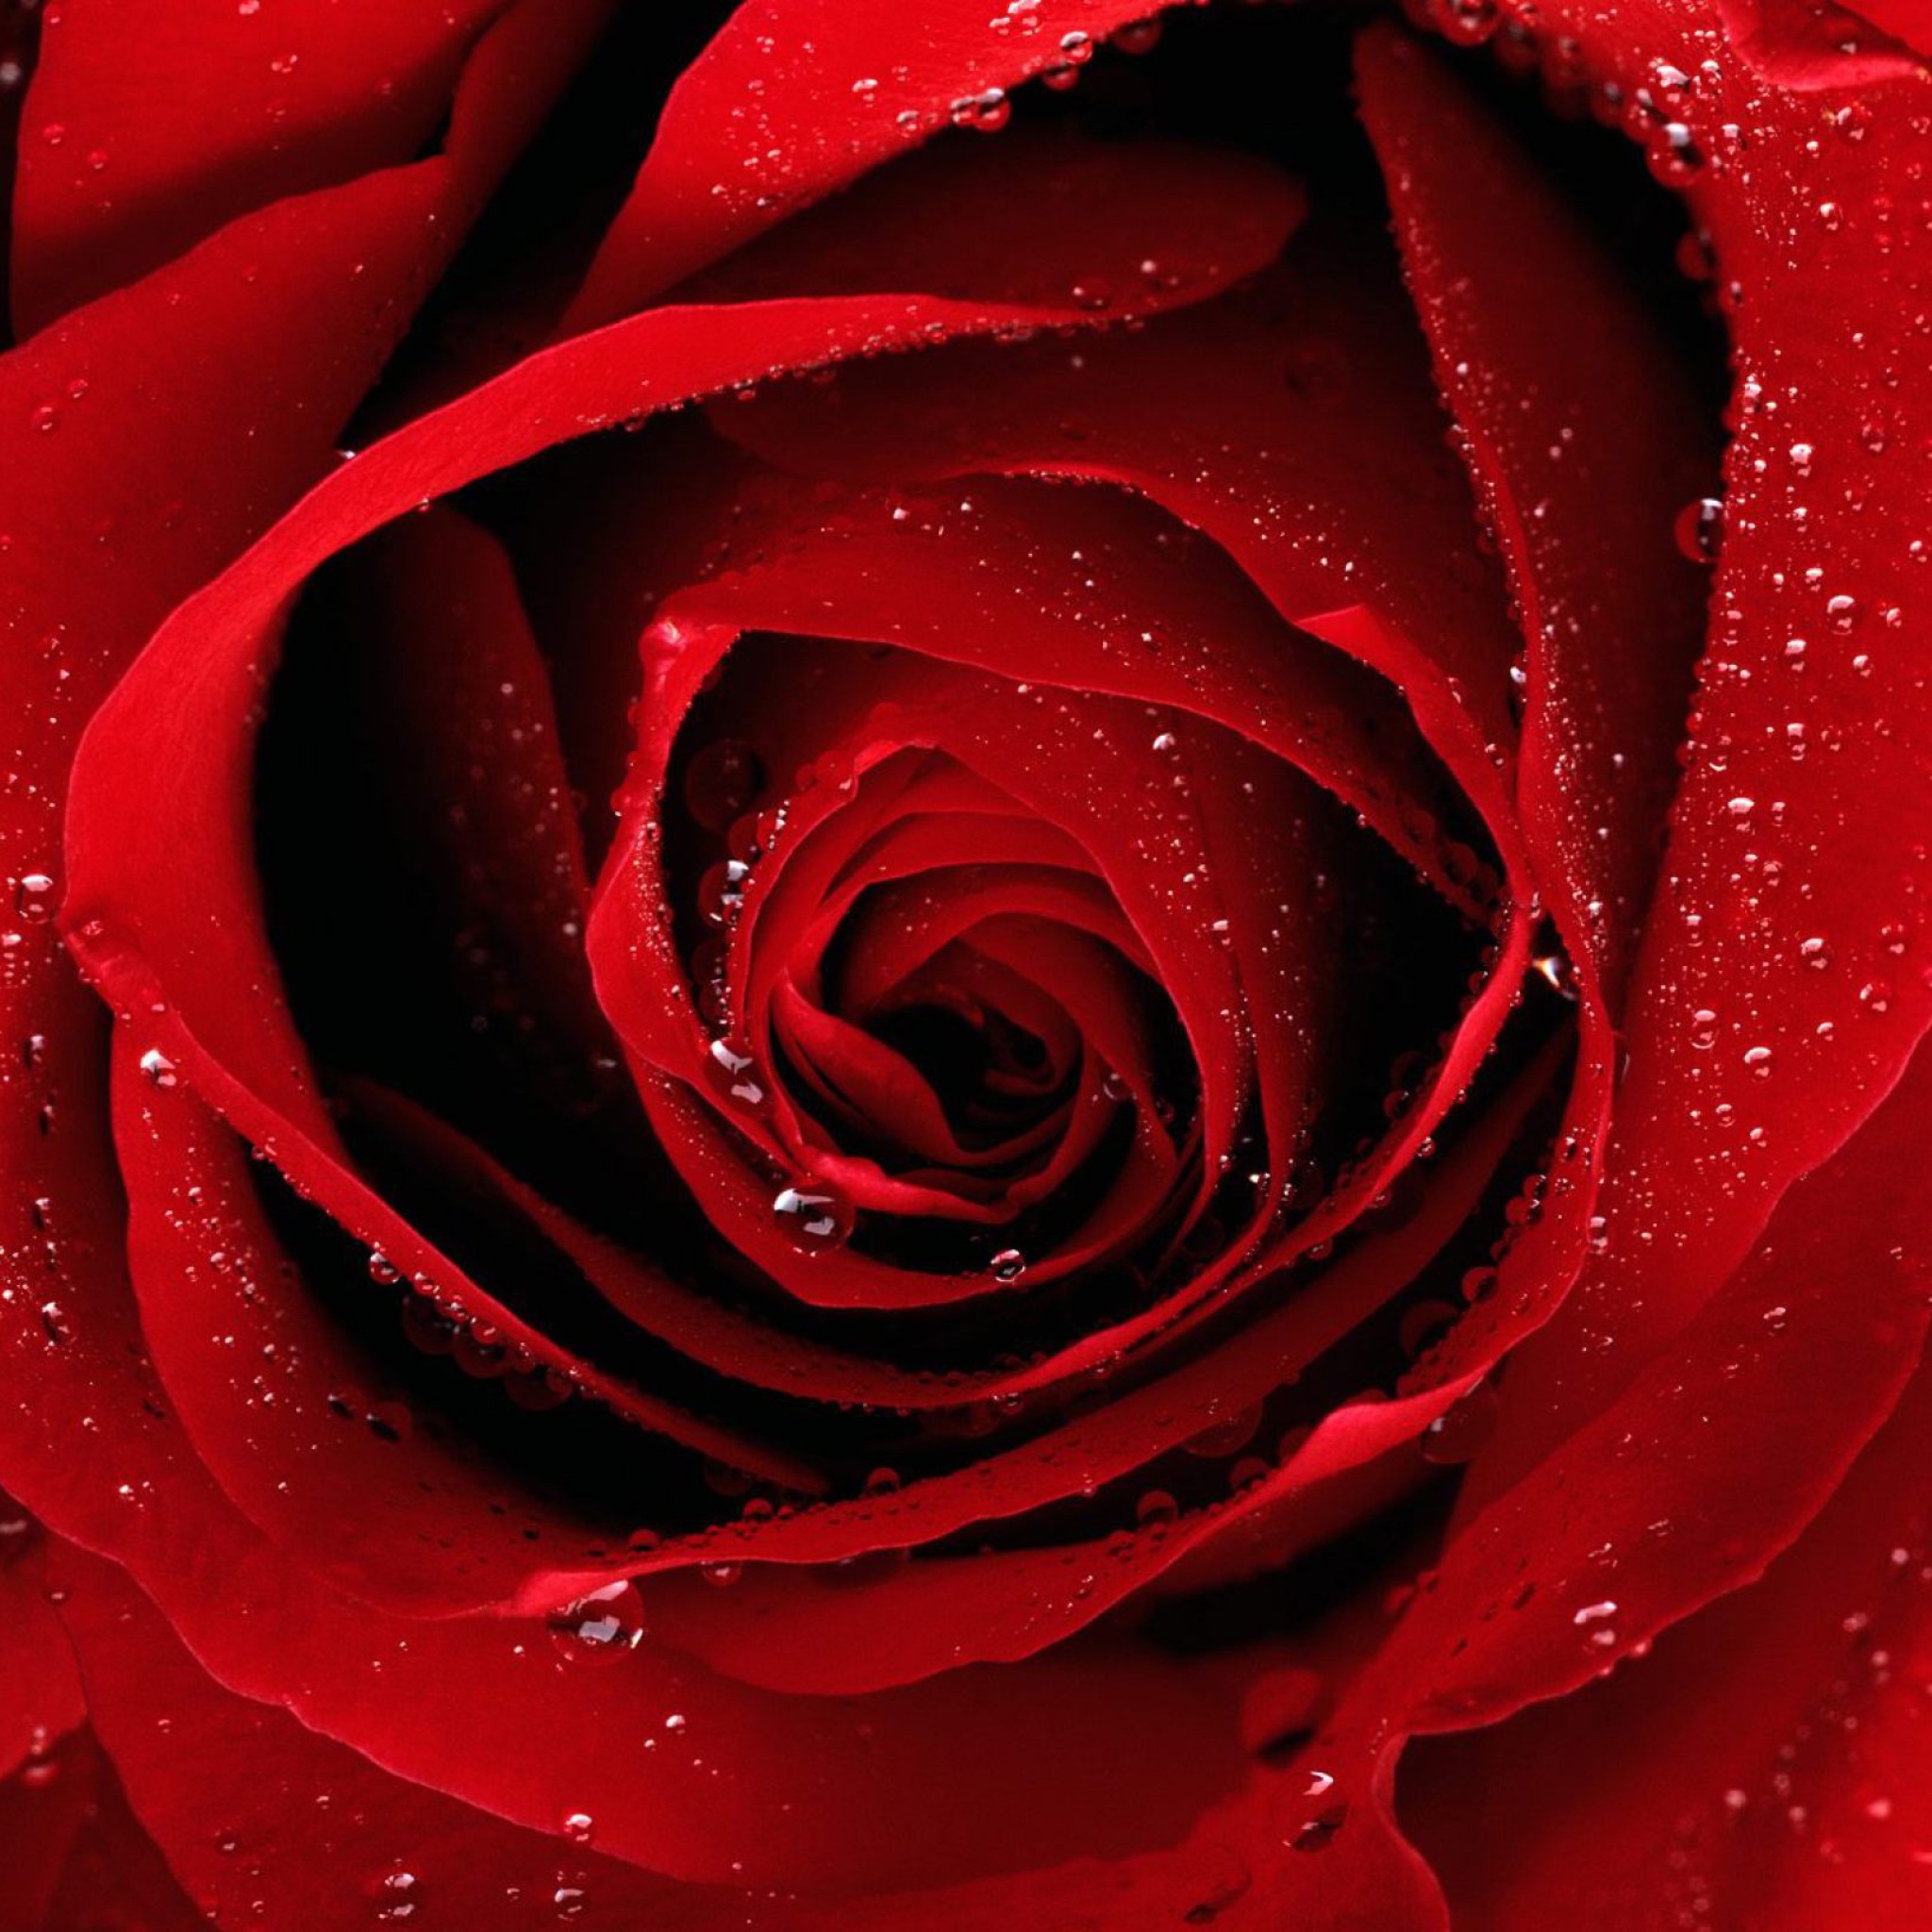 Scarlet Rose With Water Drops wallpaper 2048x2048